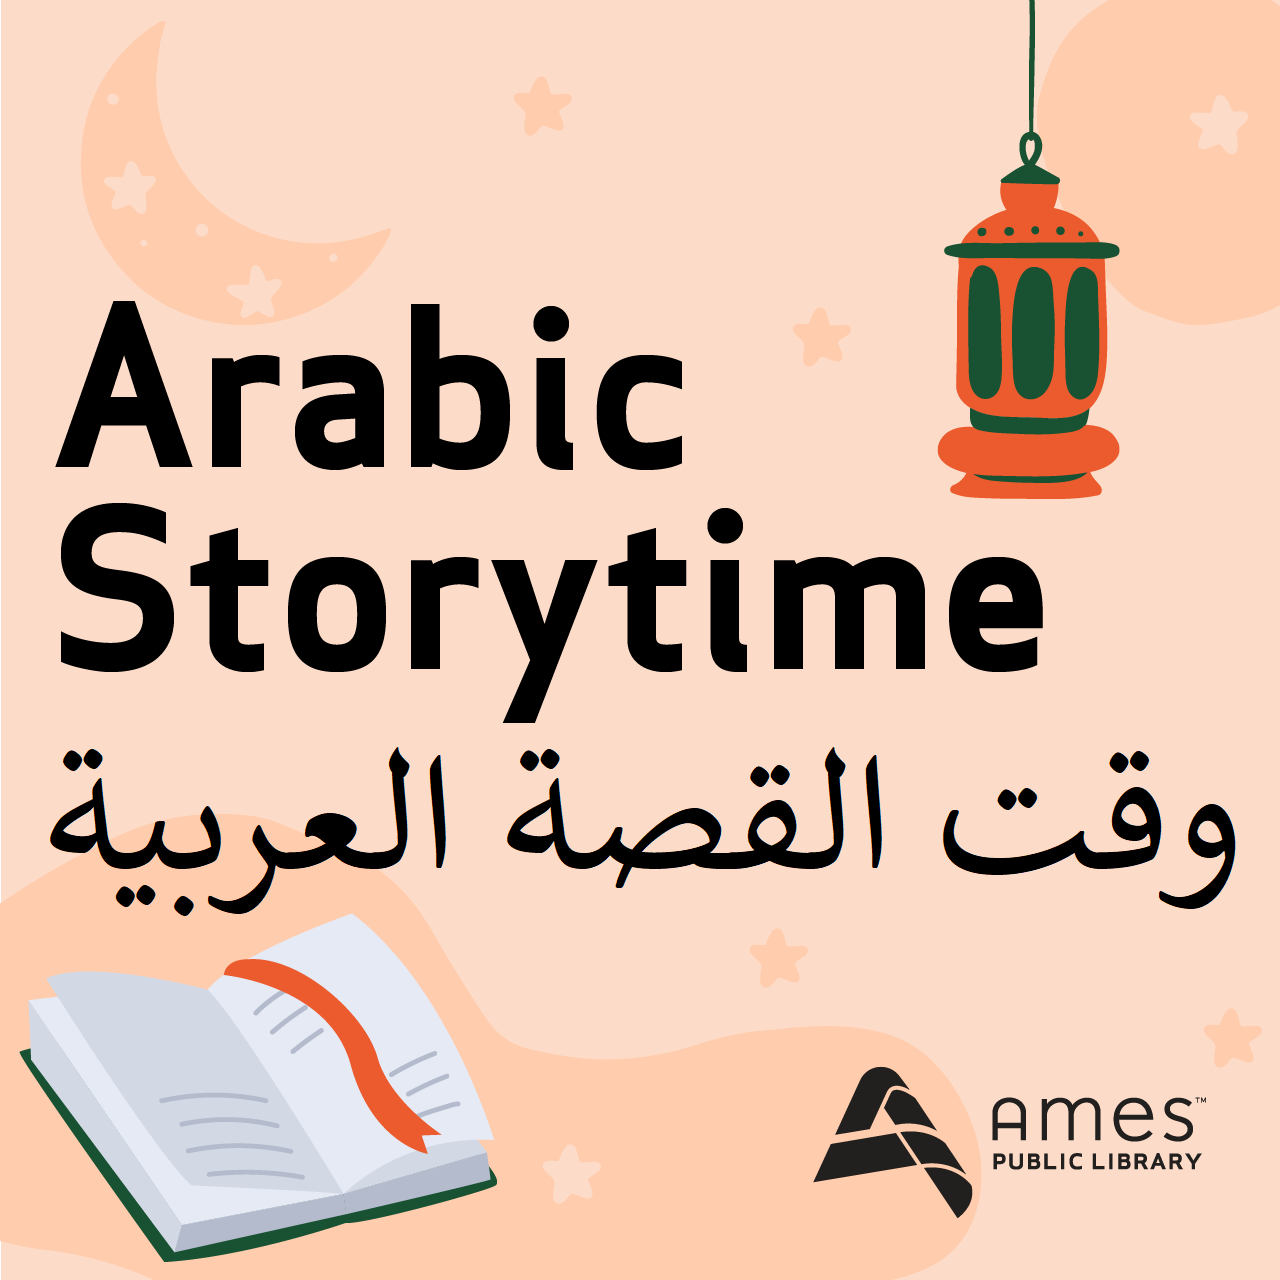 Graphic of hanging lamp and open book on stars and moon background for Arabic Storytime